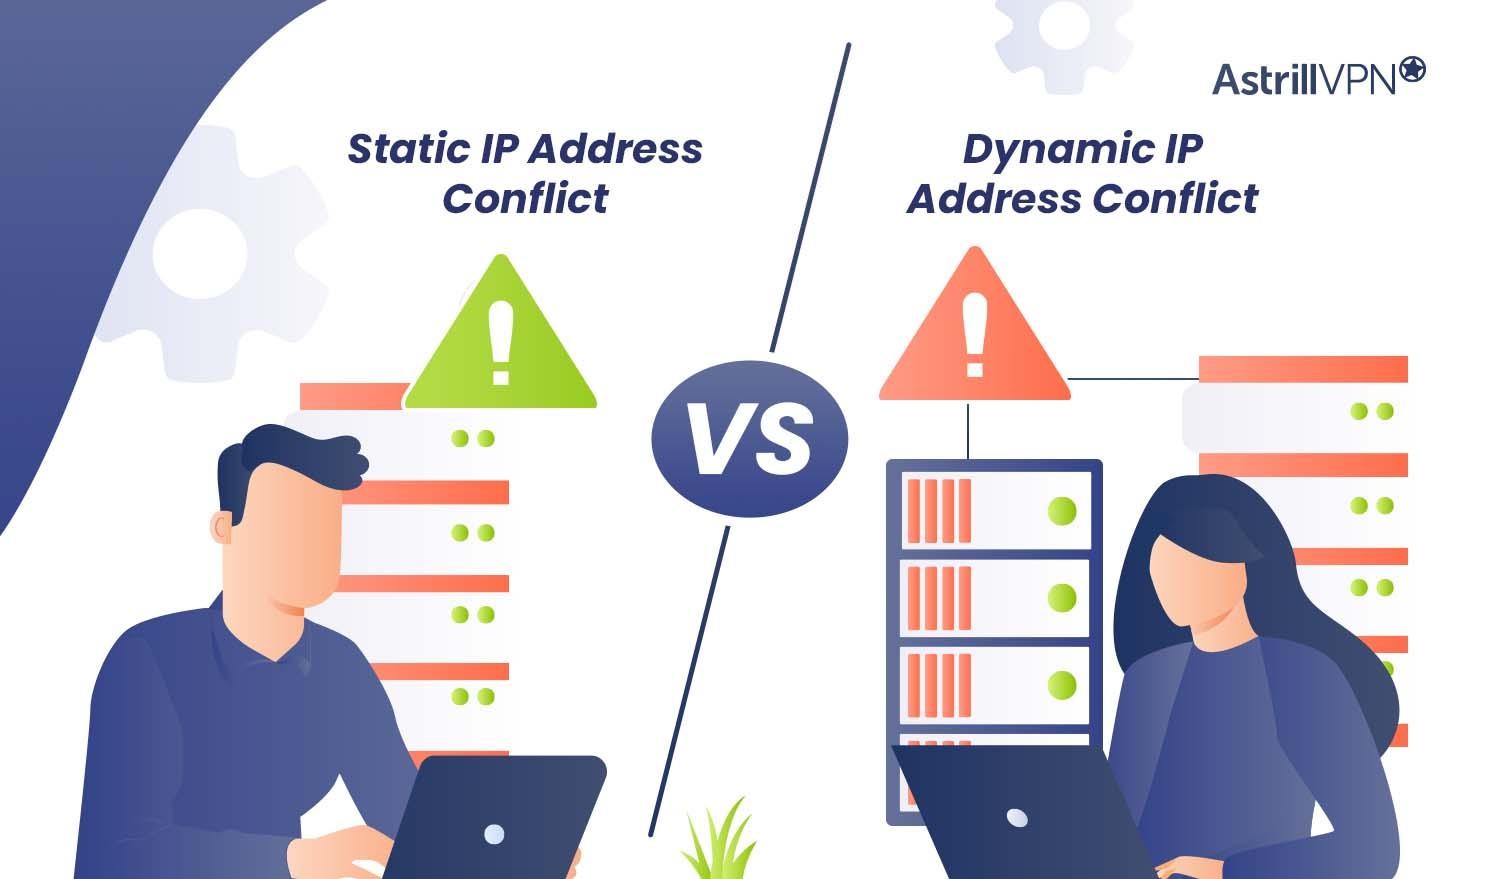 Types of IP Address Conflicts